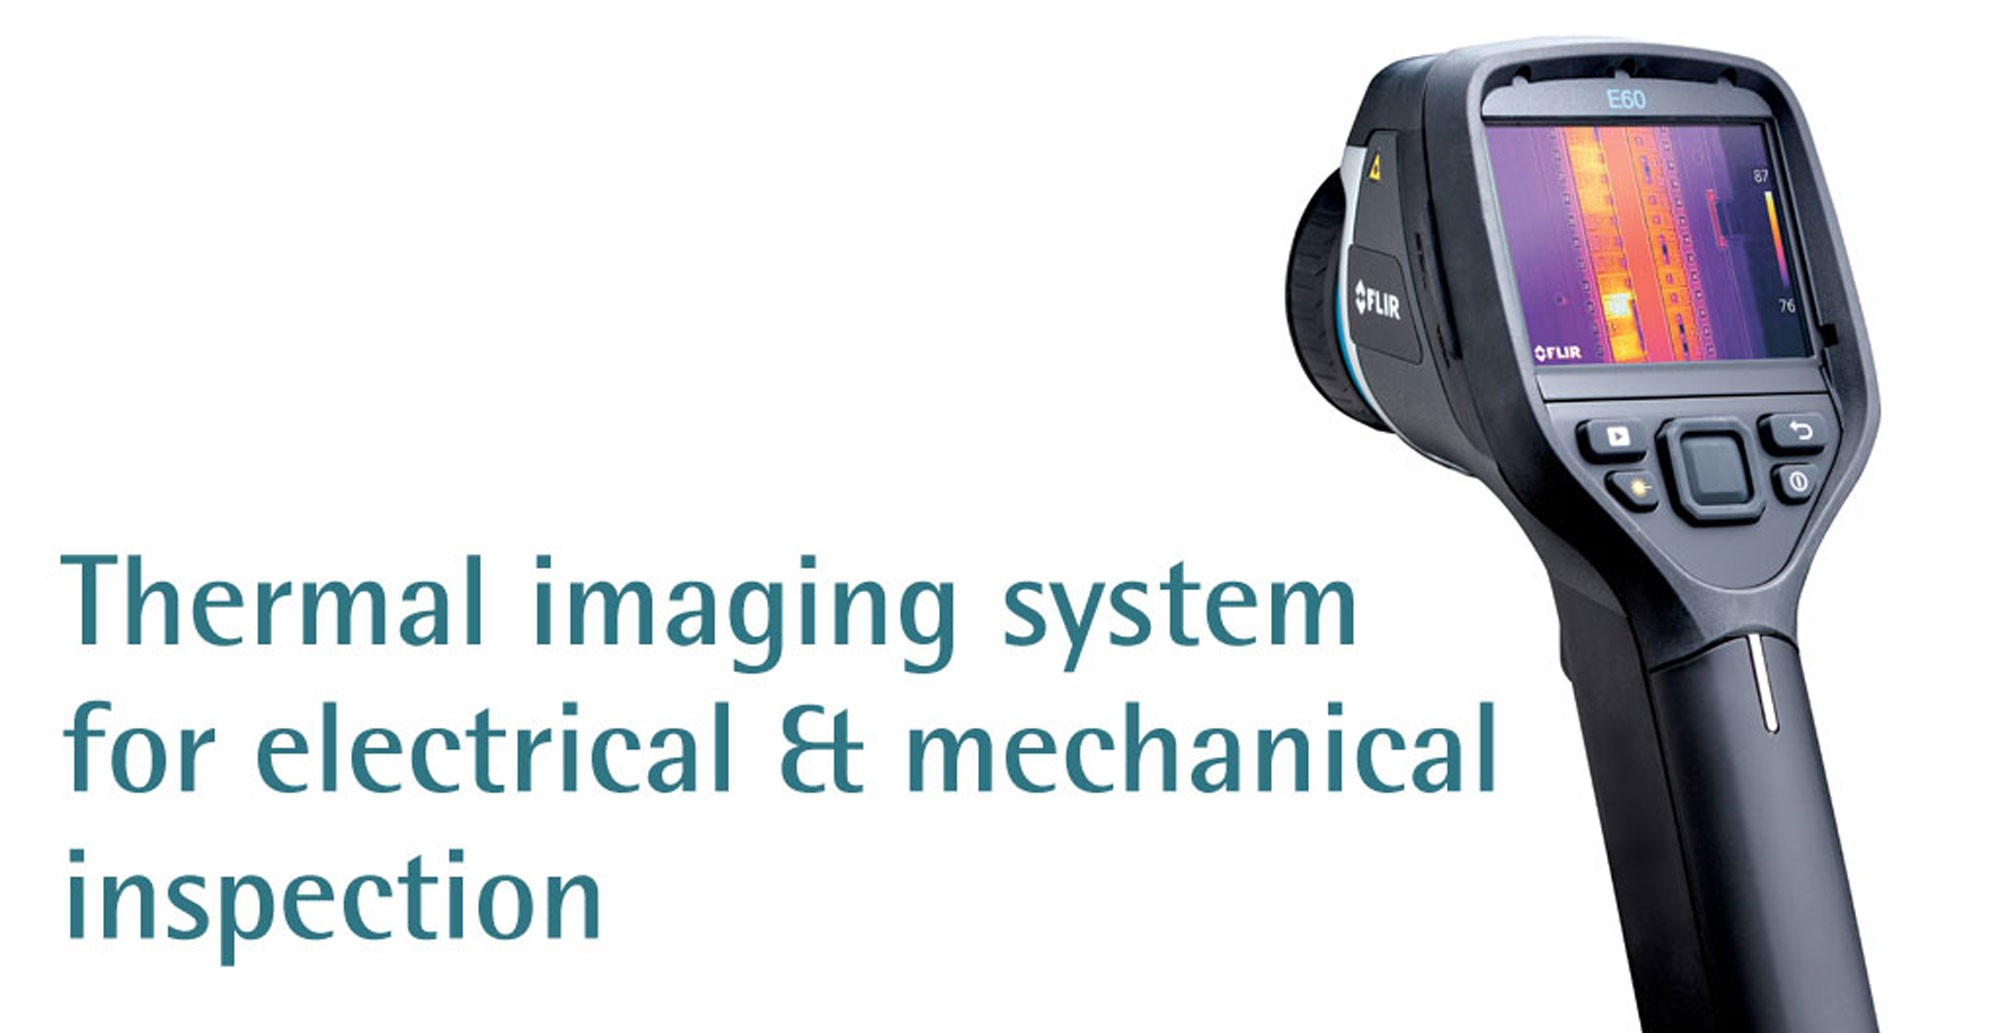 Thermal imaging system for electrical & mechanical inspection